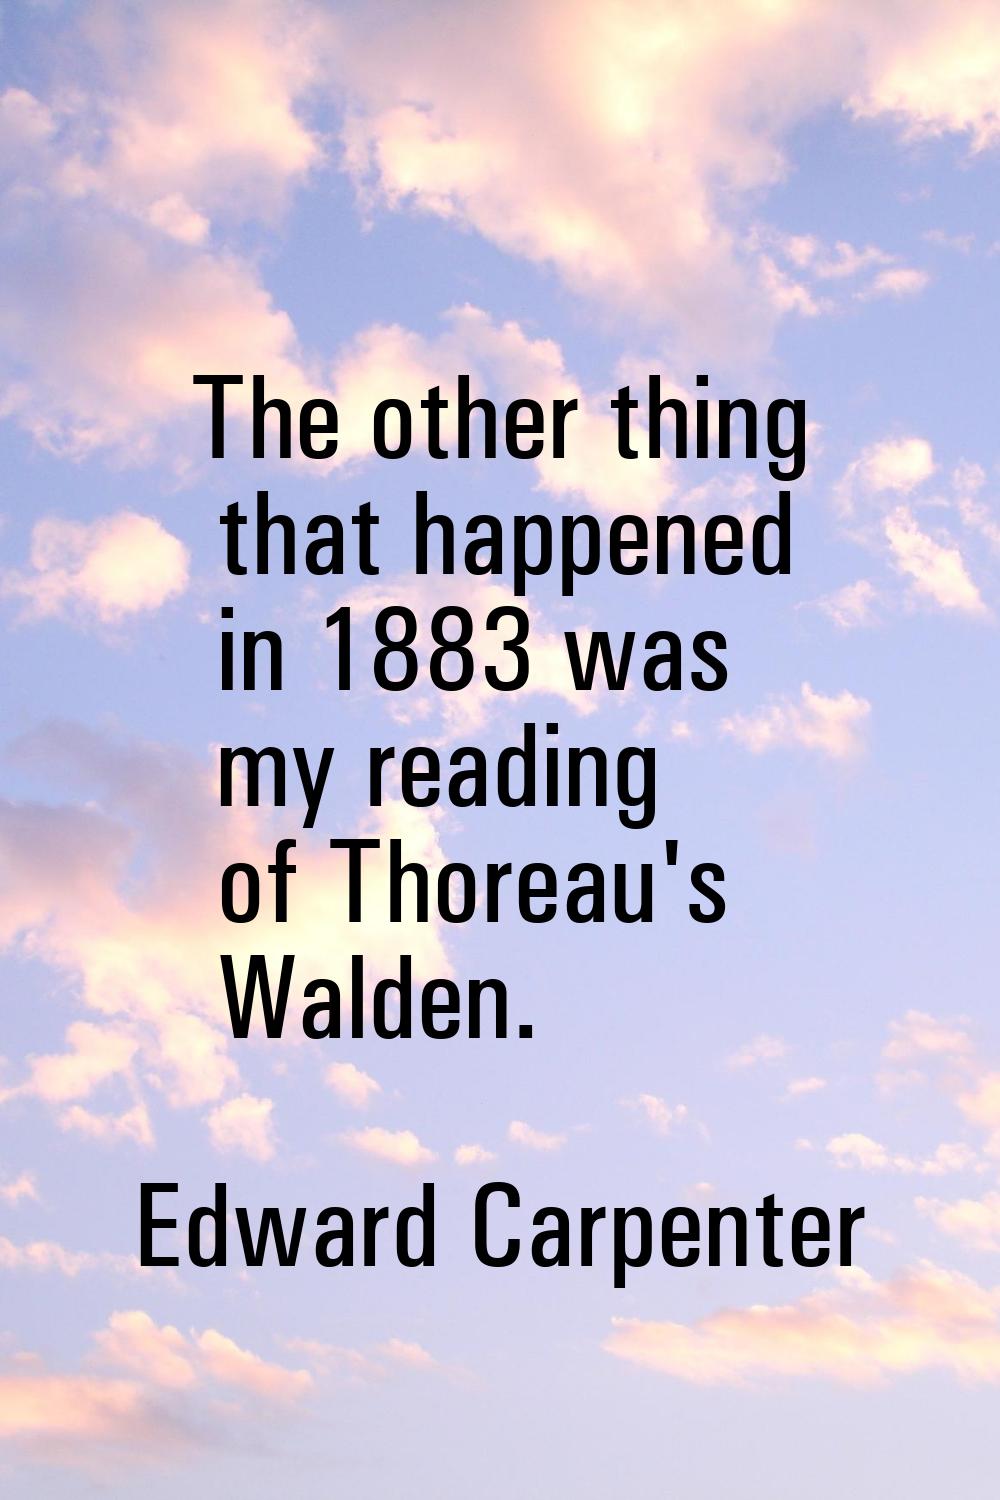 The other thing that happened in 1883 was my reading of Thoreau's Walden.